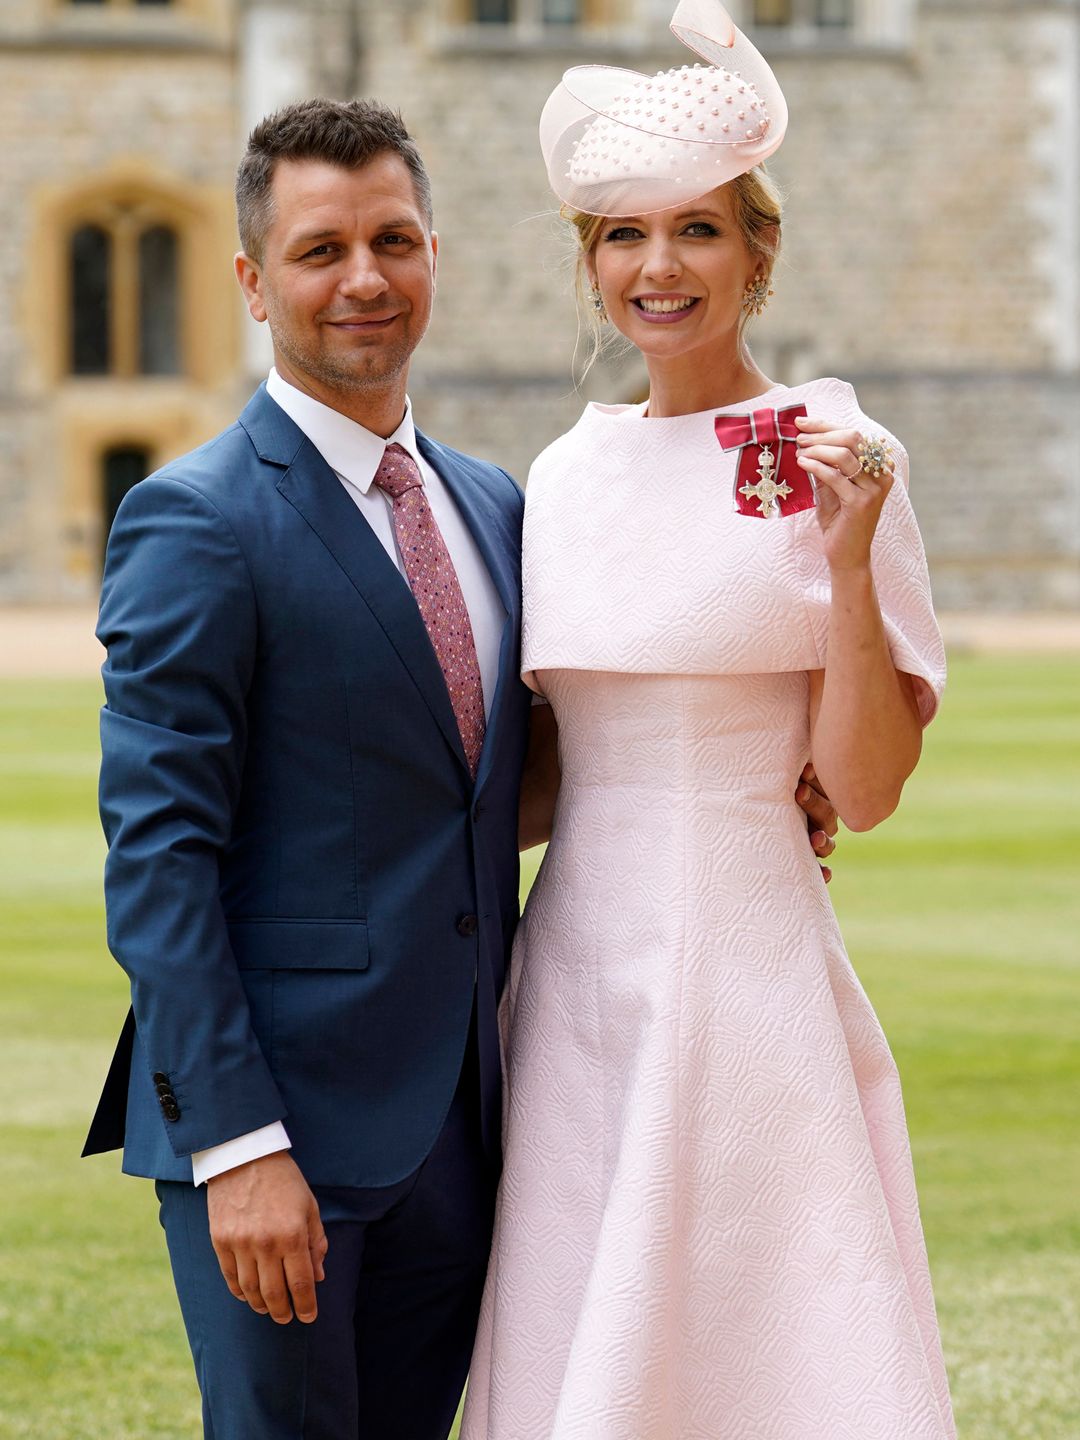 Rachel Riley posed with their medal after being appointed an Officer of the Order of the British Empire (